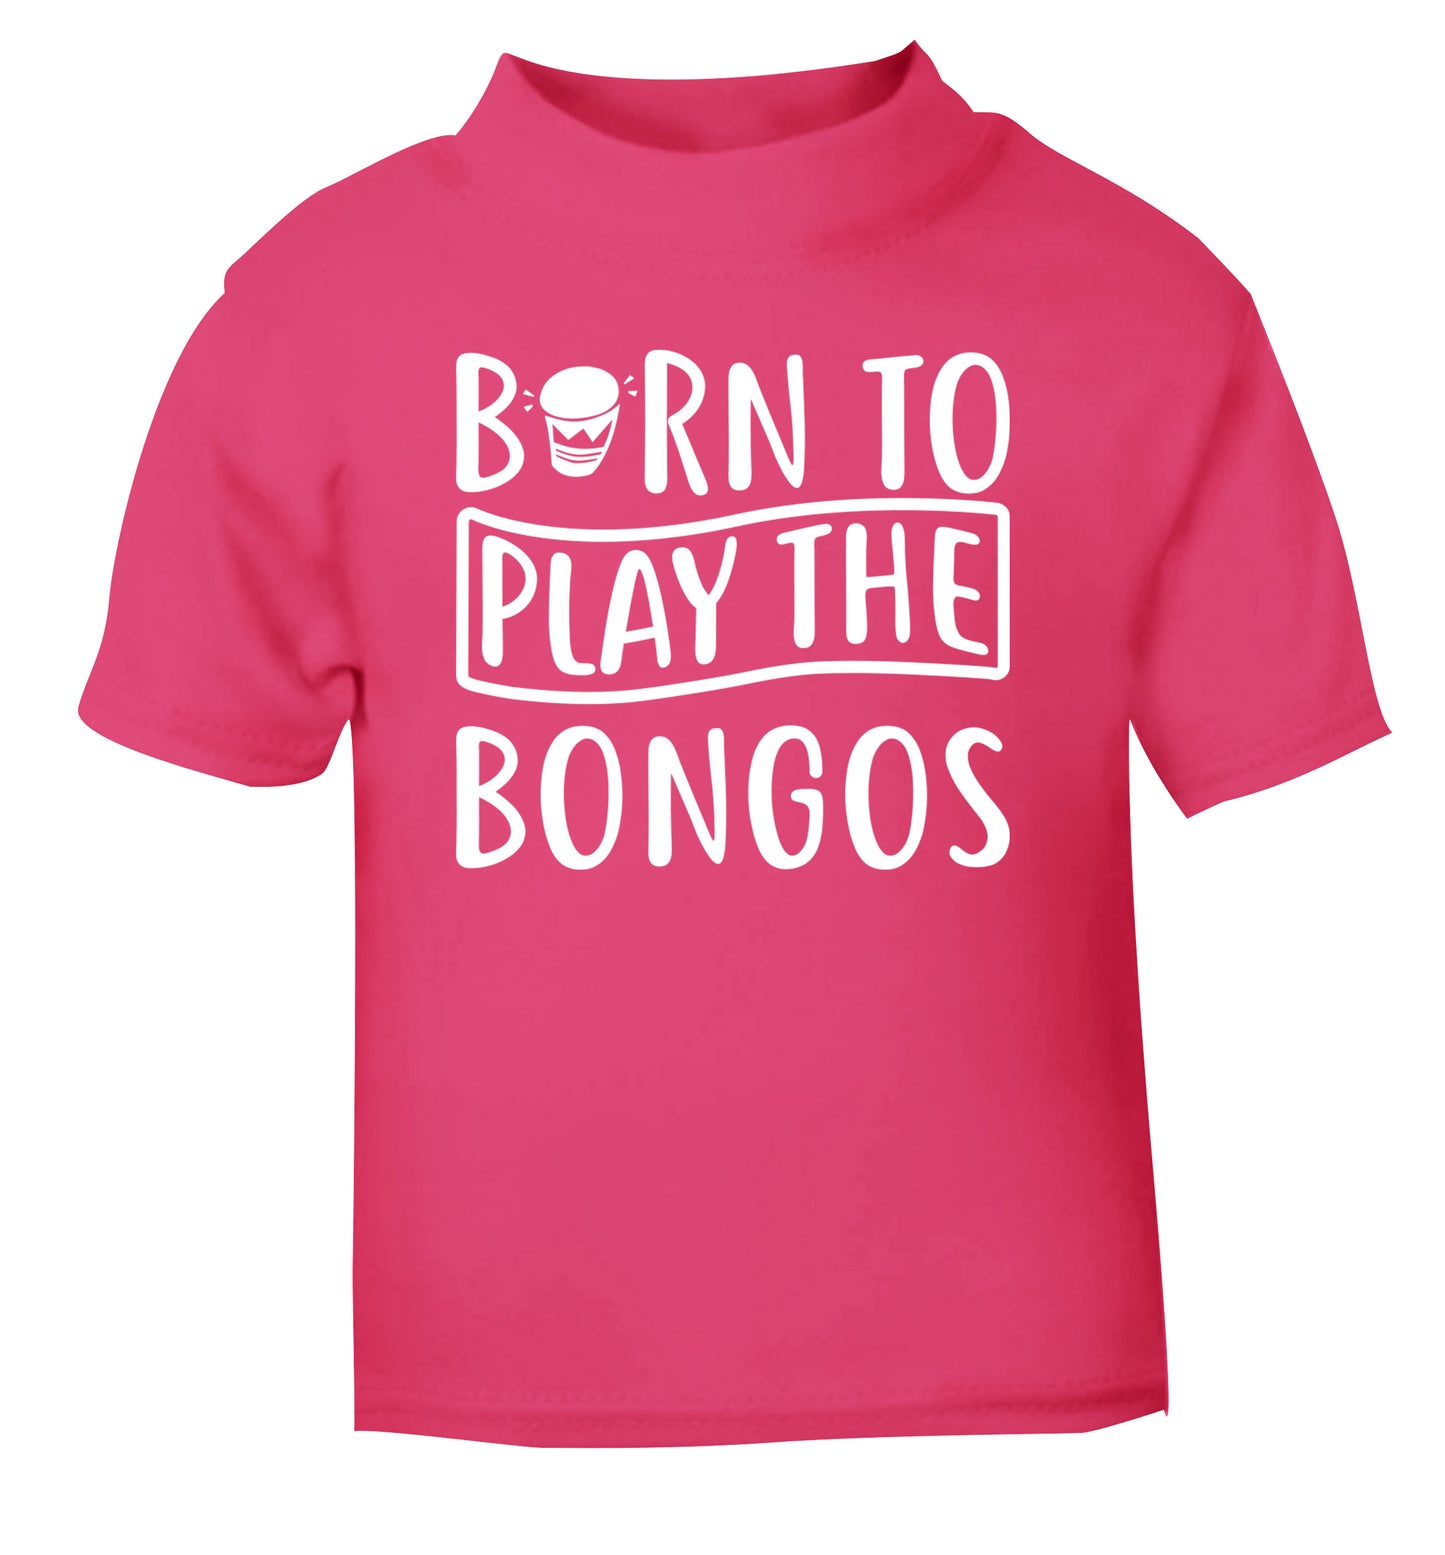 Born to play the bongos pink Baby Toddler Tshirt 2 Years